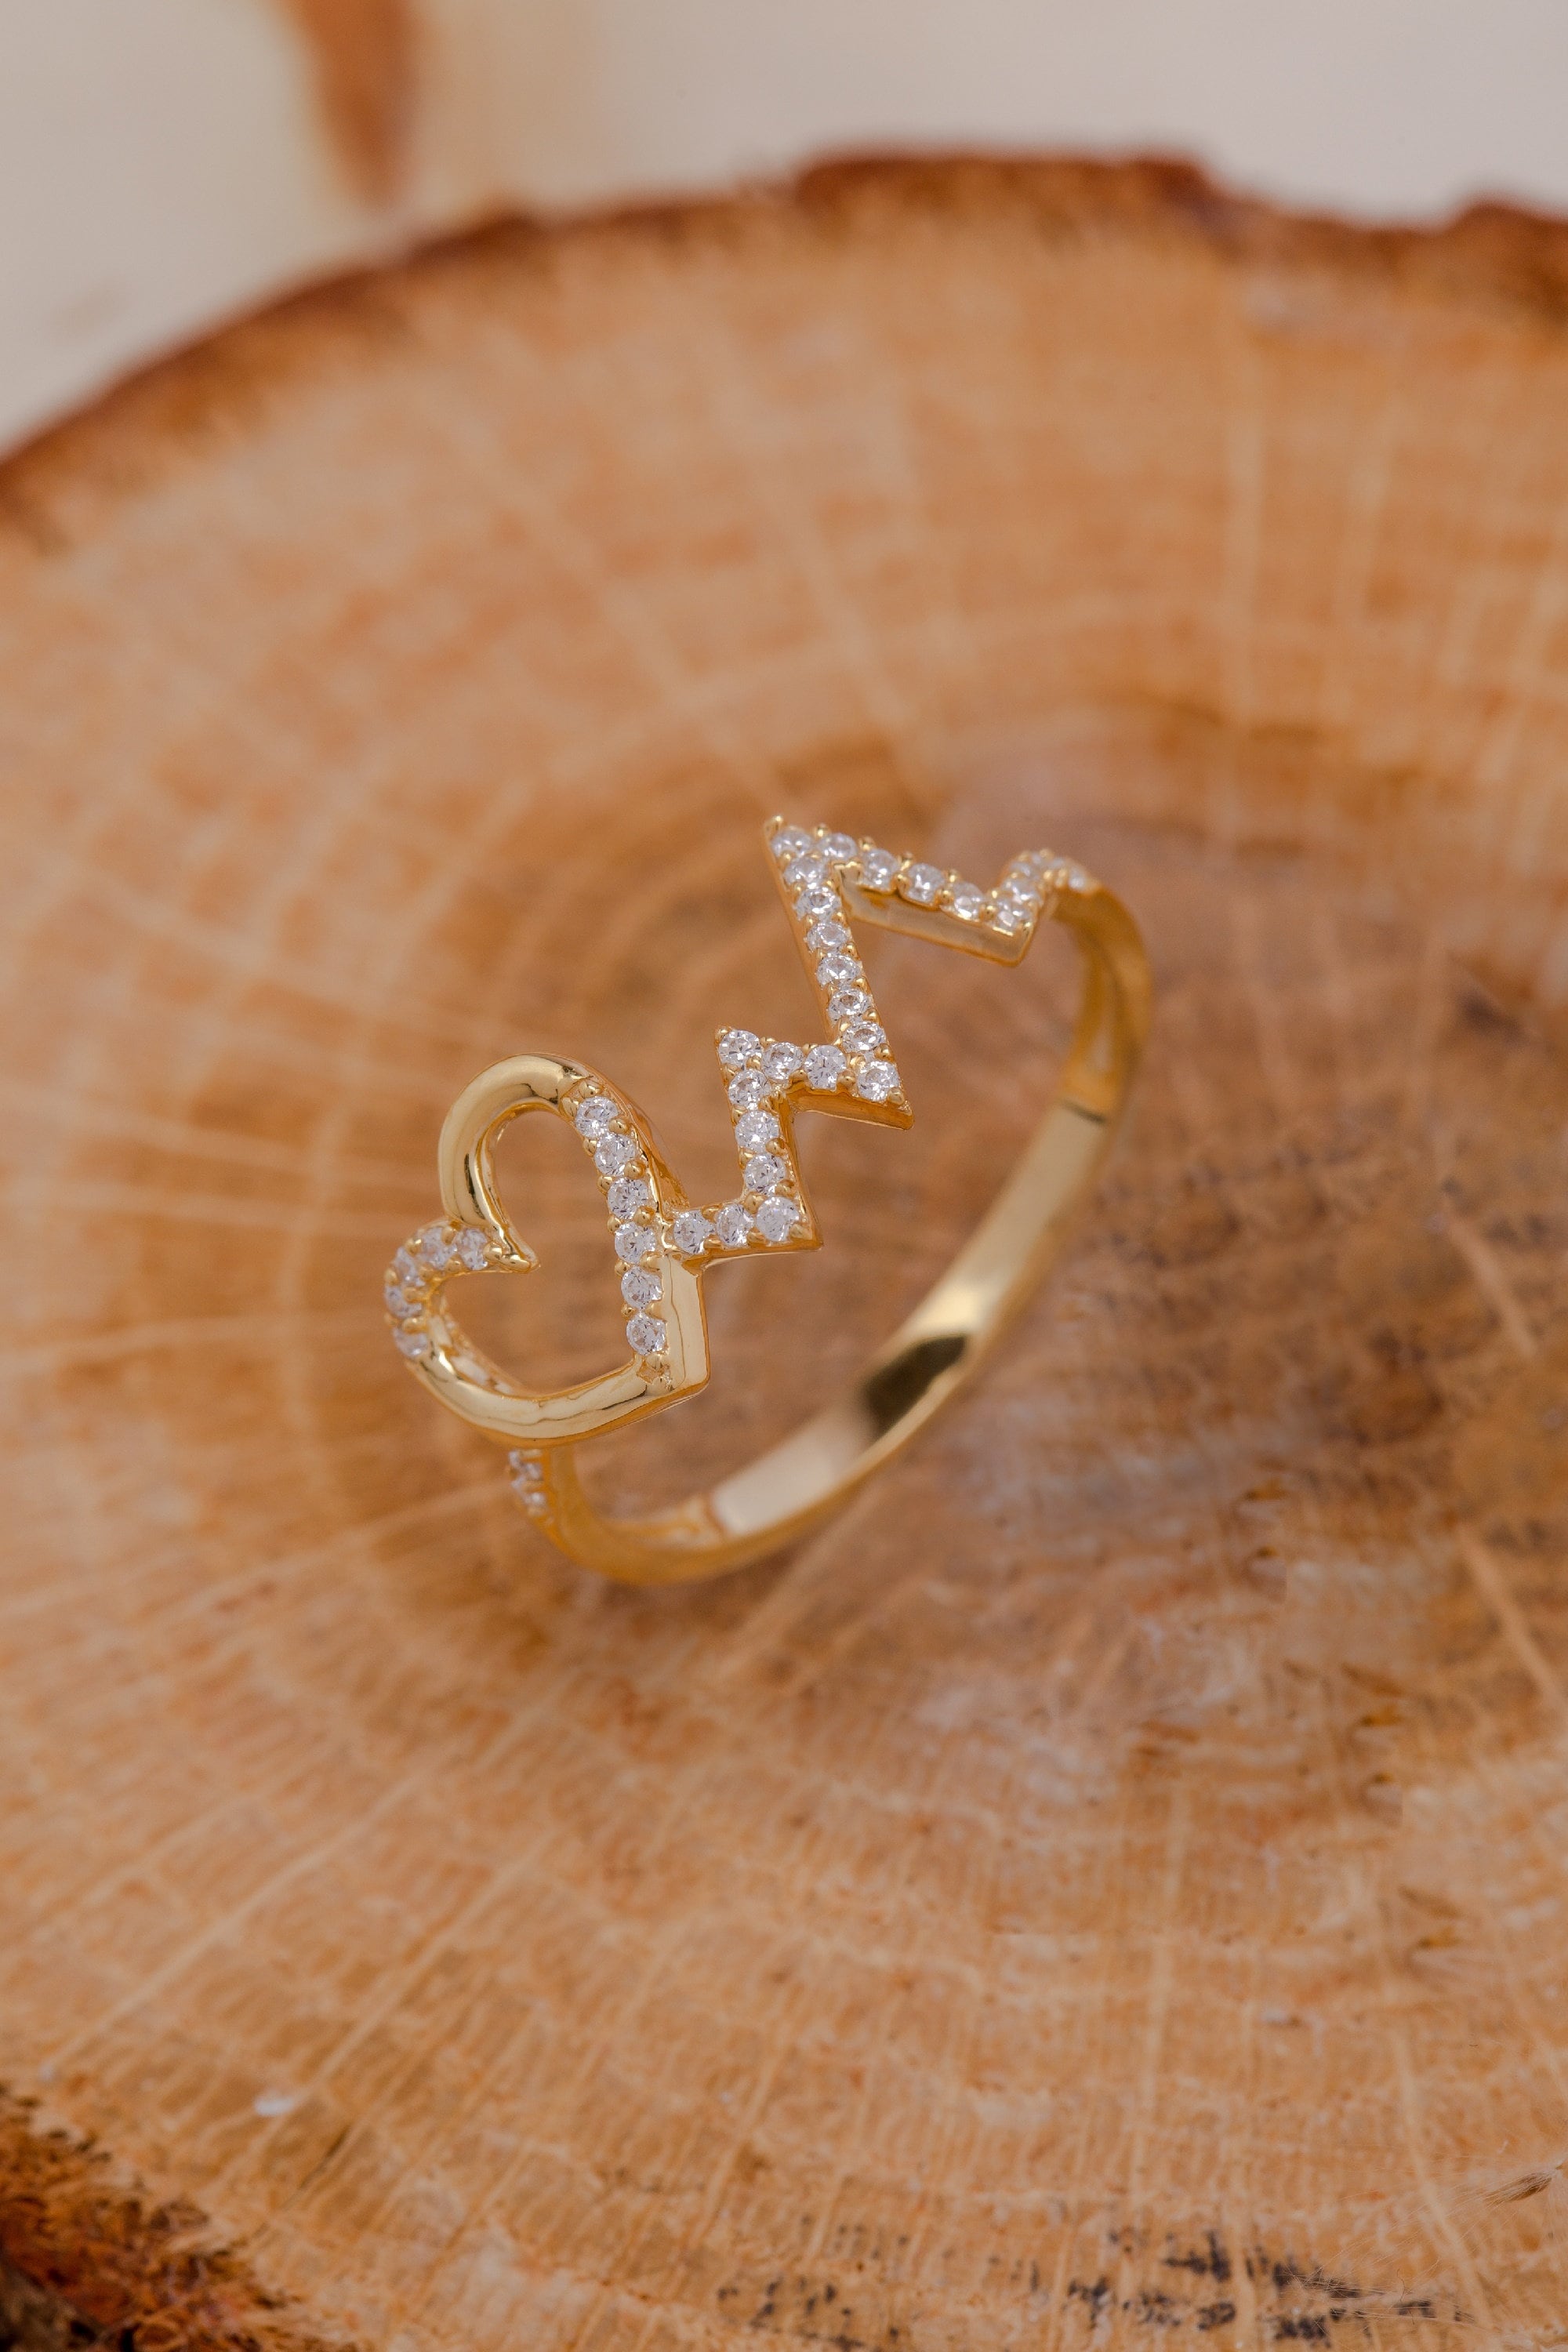 14K Gold Heart Rhythm Ring, Lifeline Pulse Ring, Love Heartbeat Ring, 925 Sterling Silver Handmade Heart Rhtym Ring, Gift for Wife and Gift